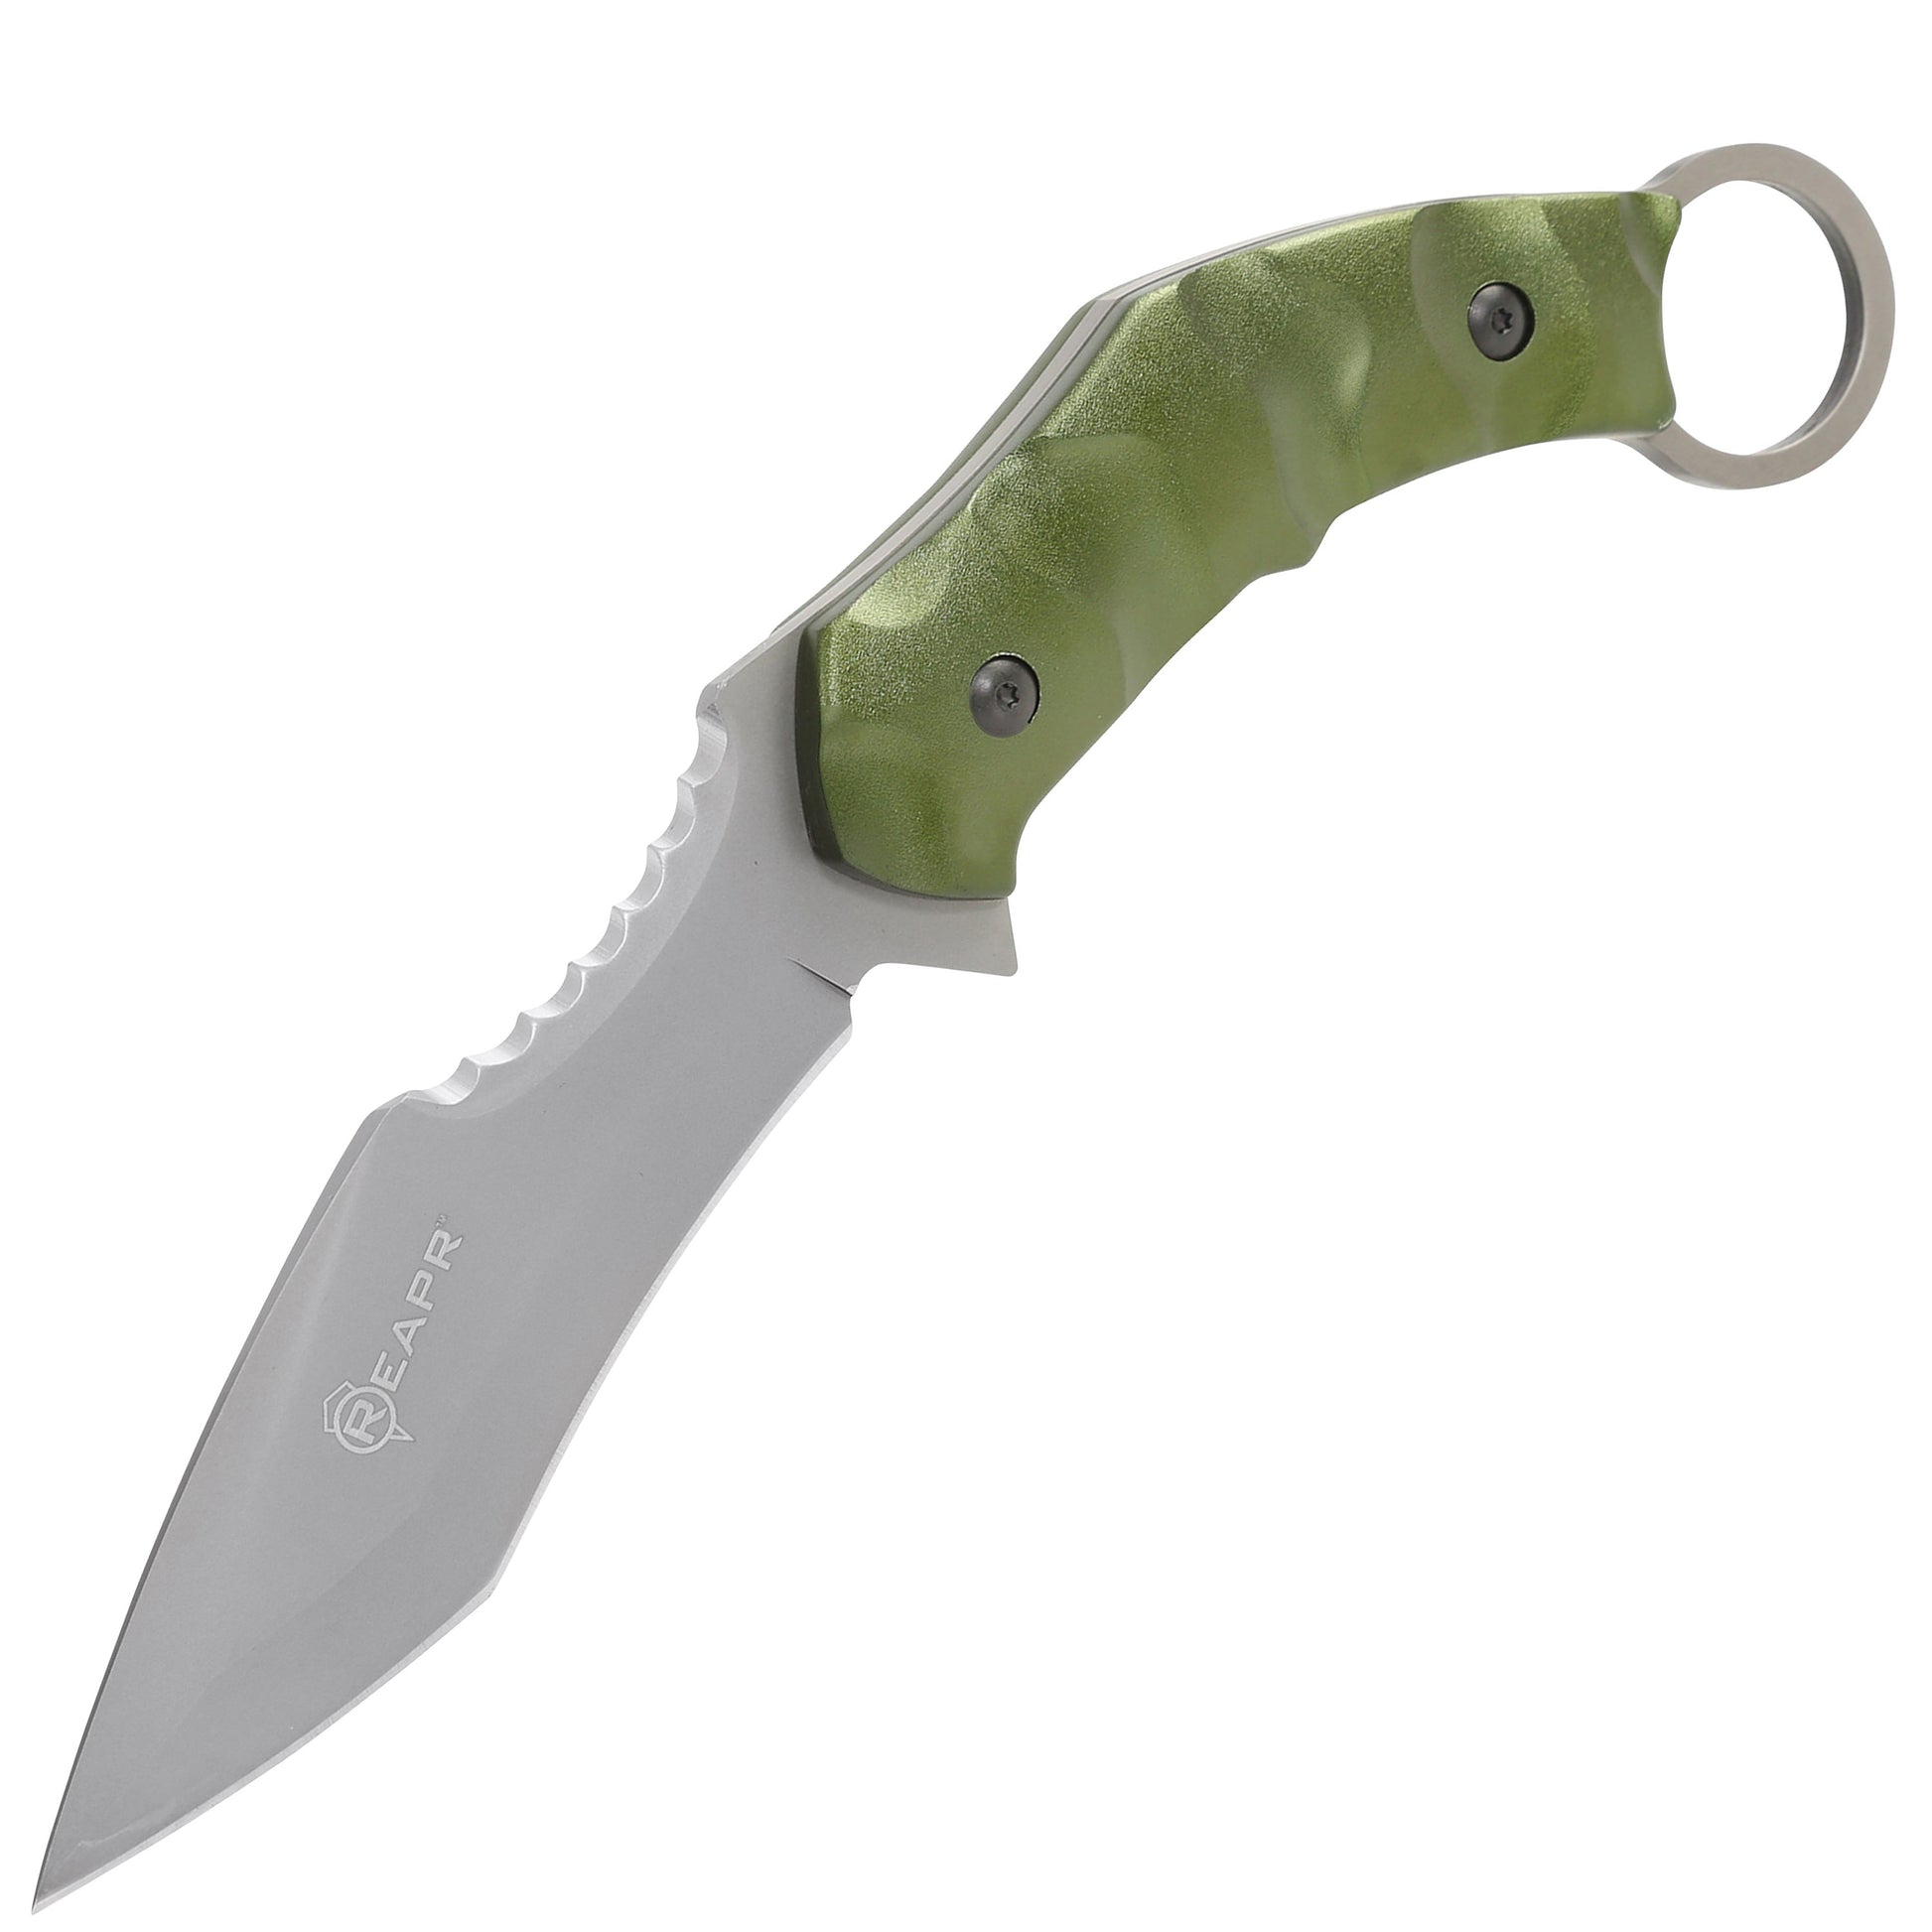 REAPR 11010 Fixed Blade SLAMR Knife full tang design allows extra strength and leverage for cutting, slashing and chopping.